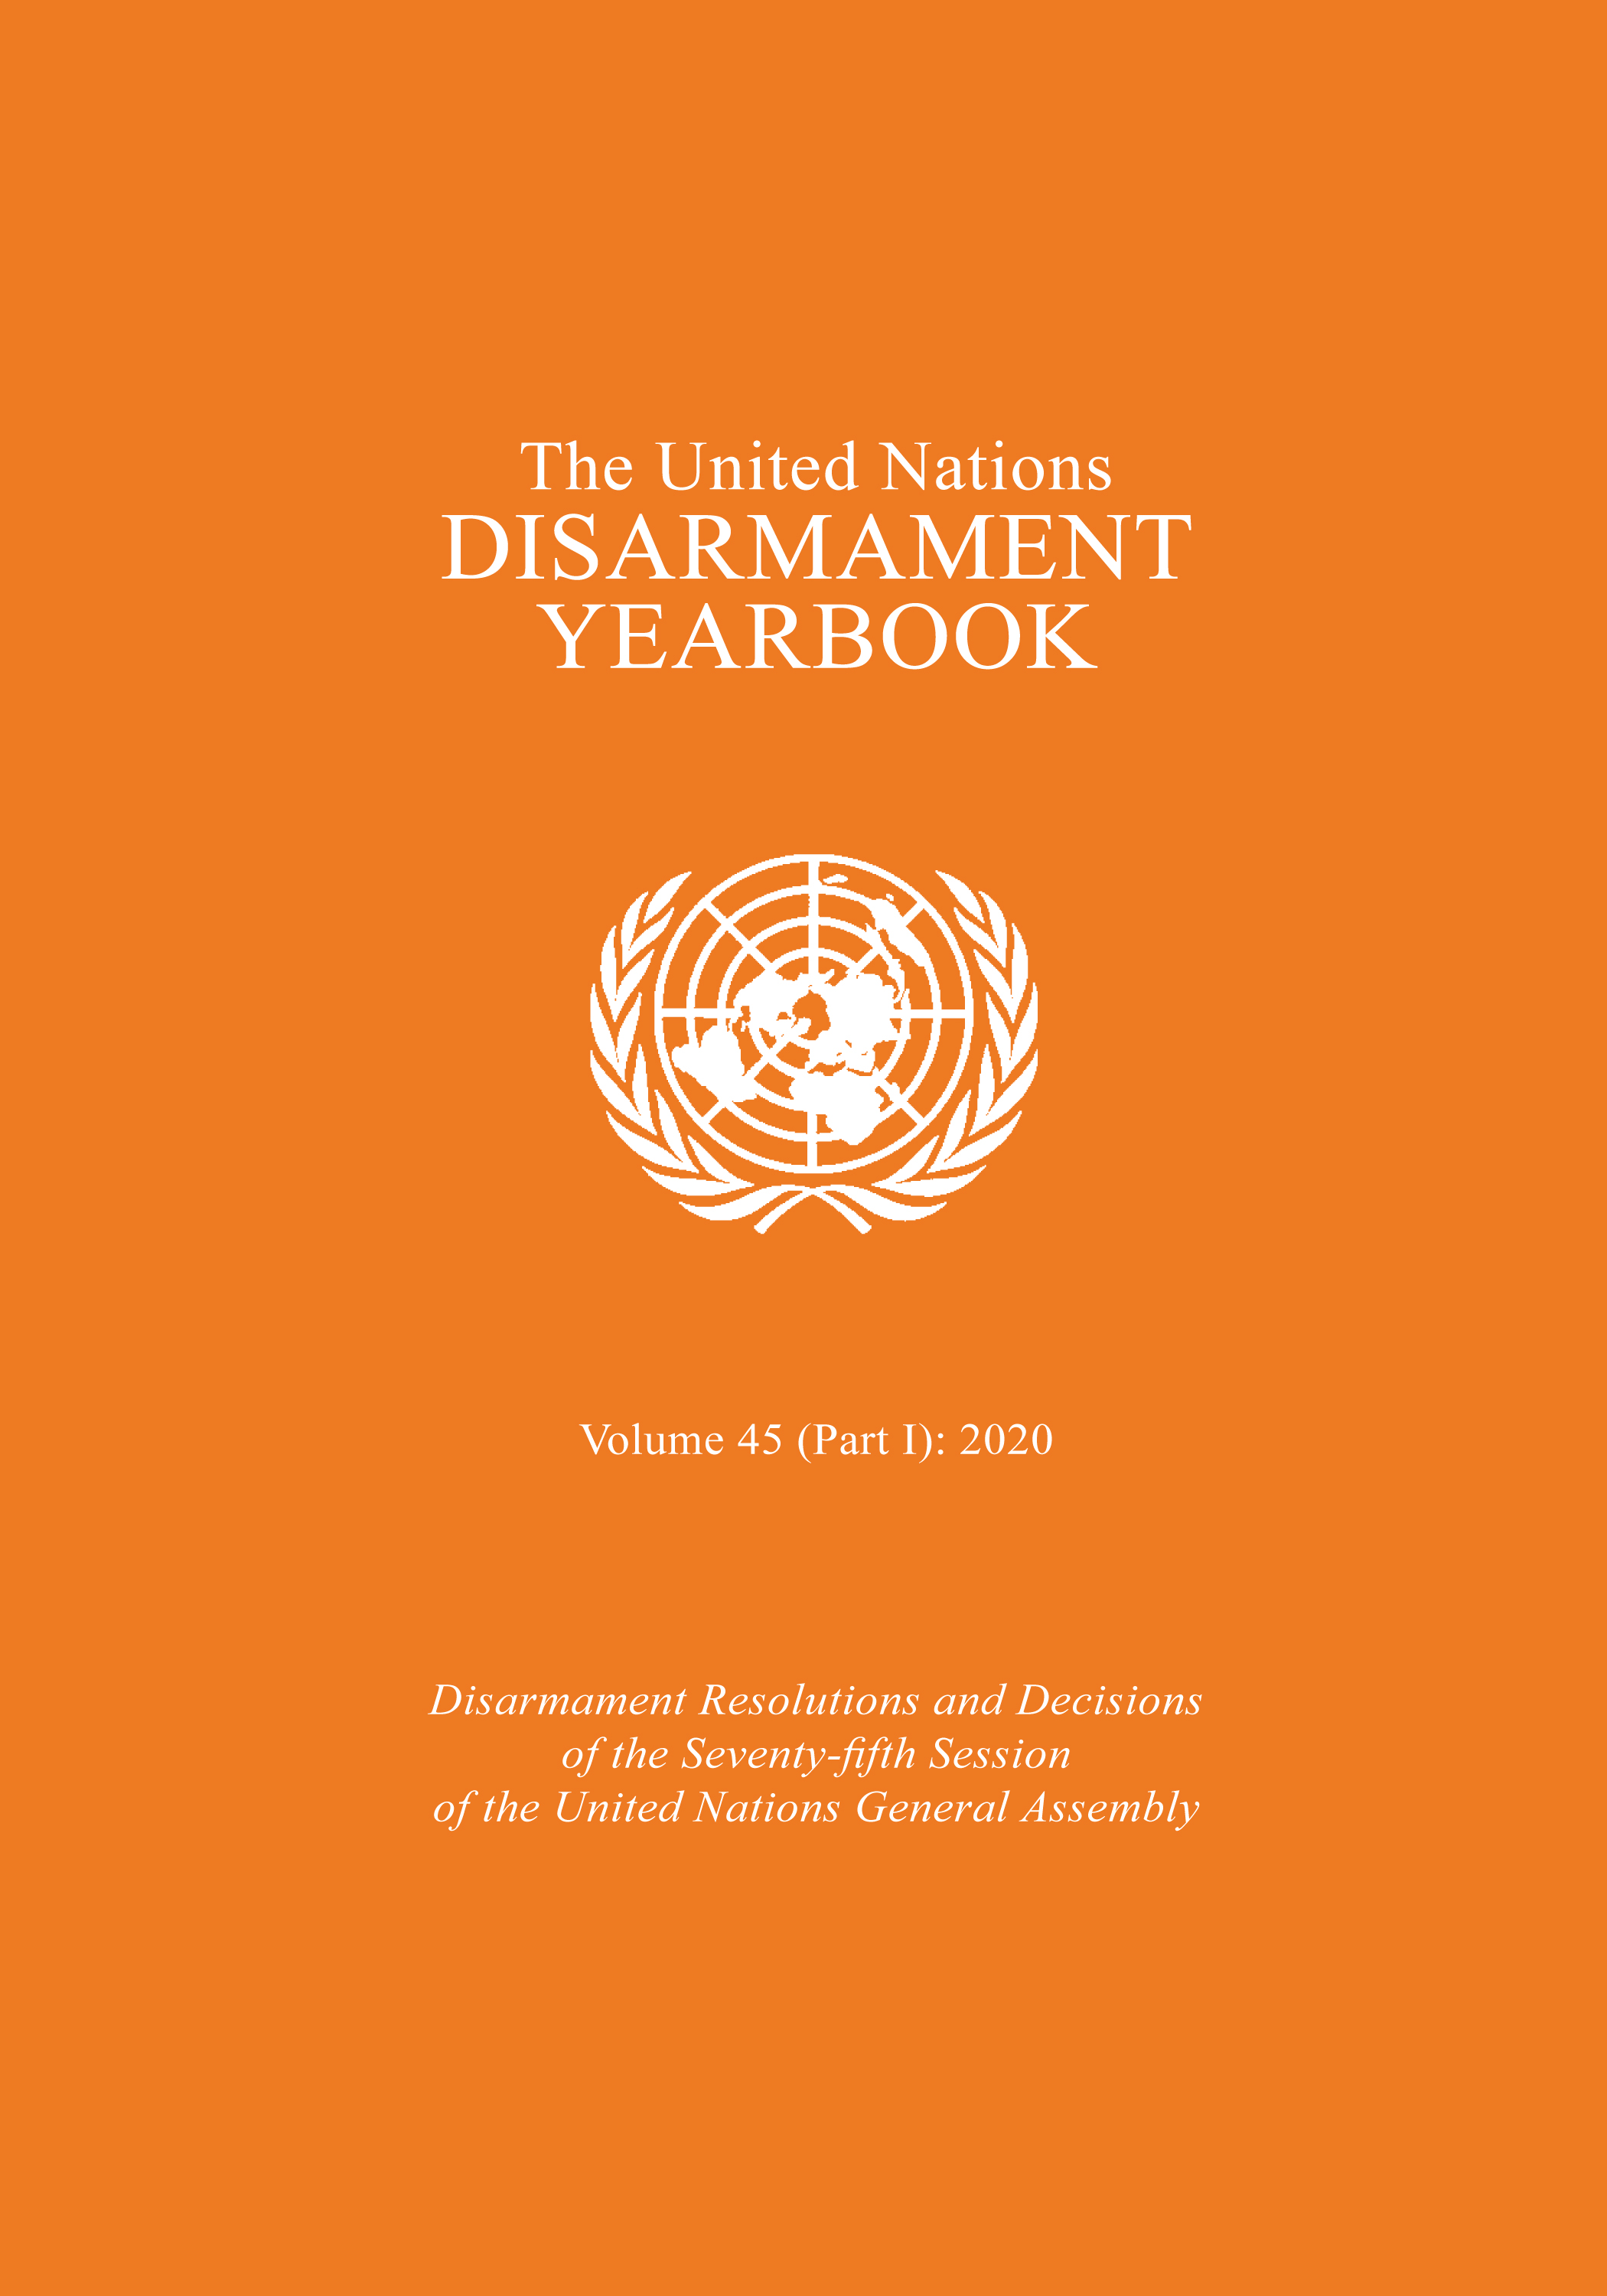 image of 75/65 Towards a nuclear-weapon-free world: accelerating the implementation of nuclear disarmament commitments